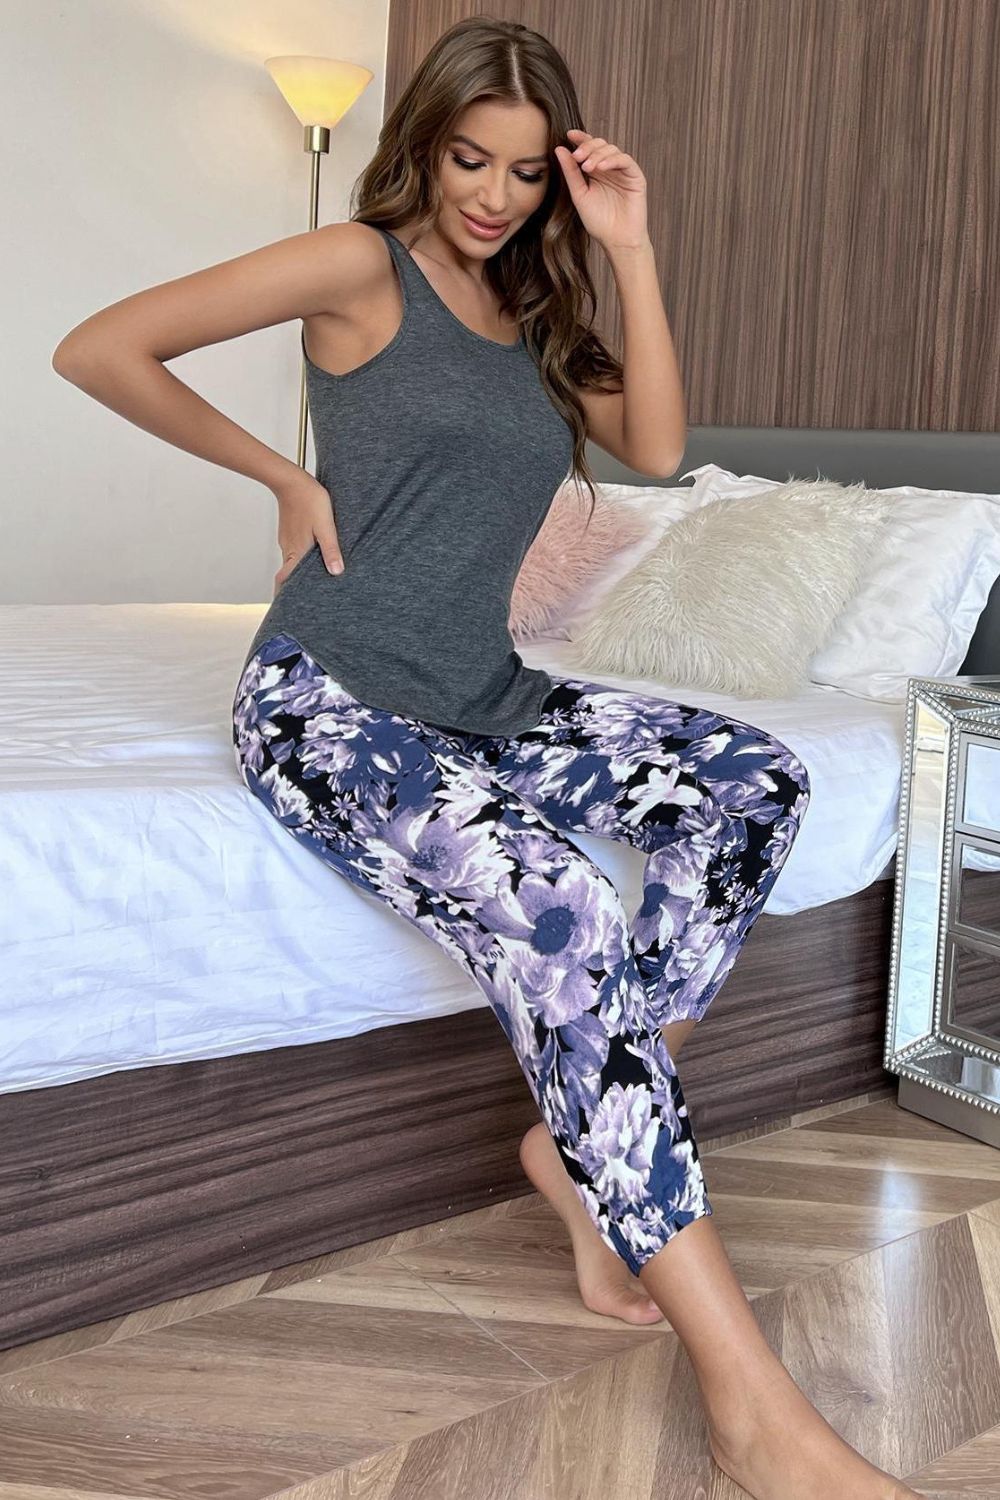 Scoop Neck Tank and Floral Cropped Pants Lounge Set - Ryzela